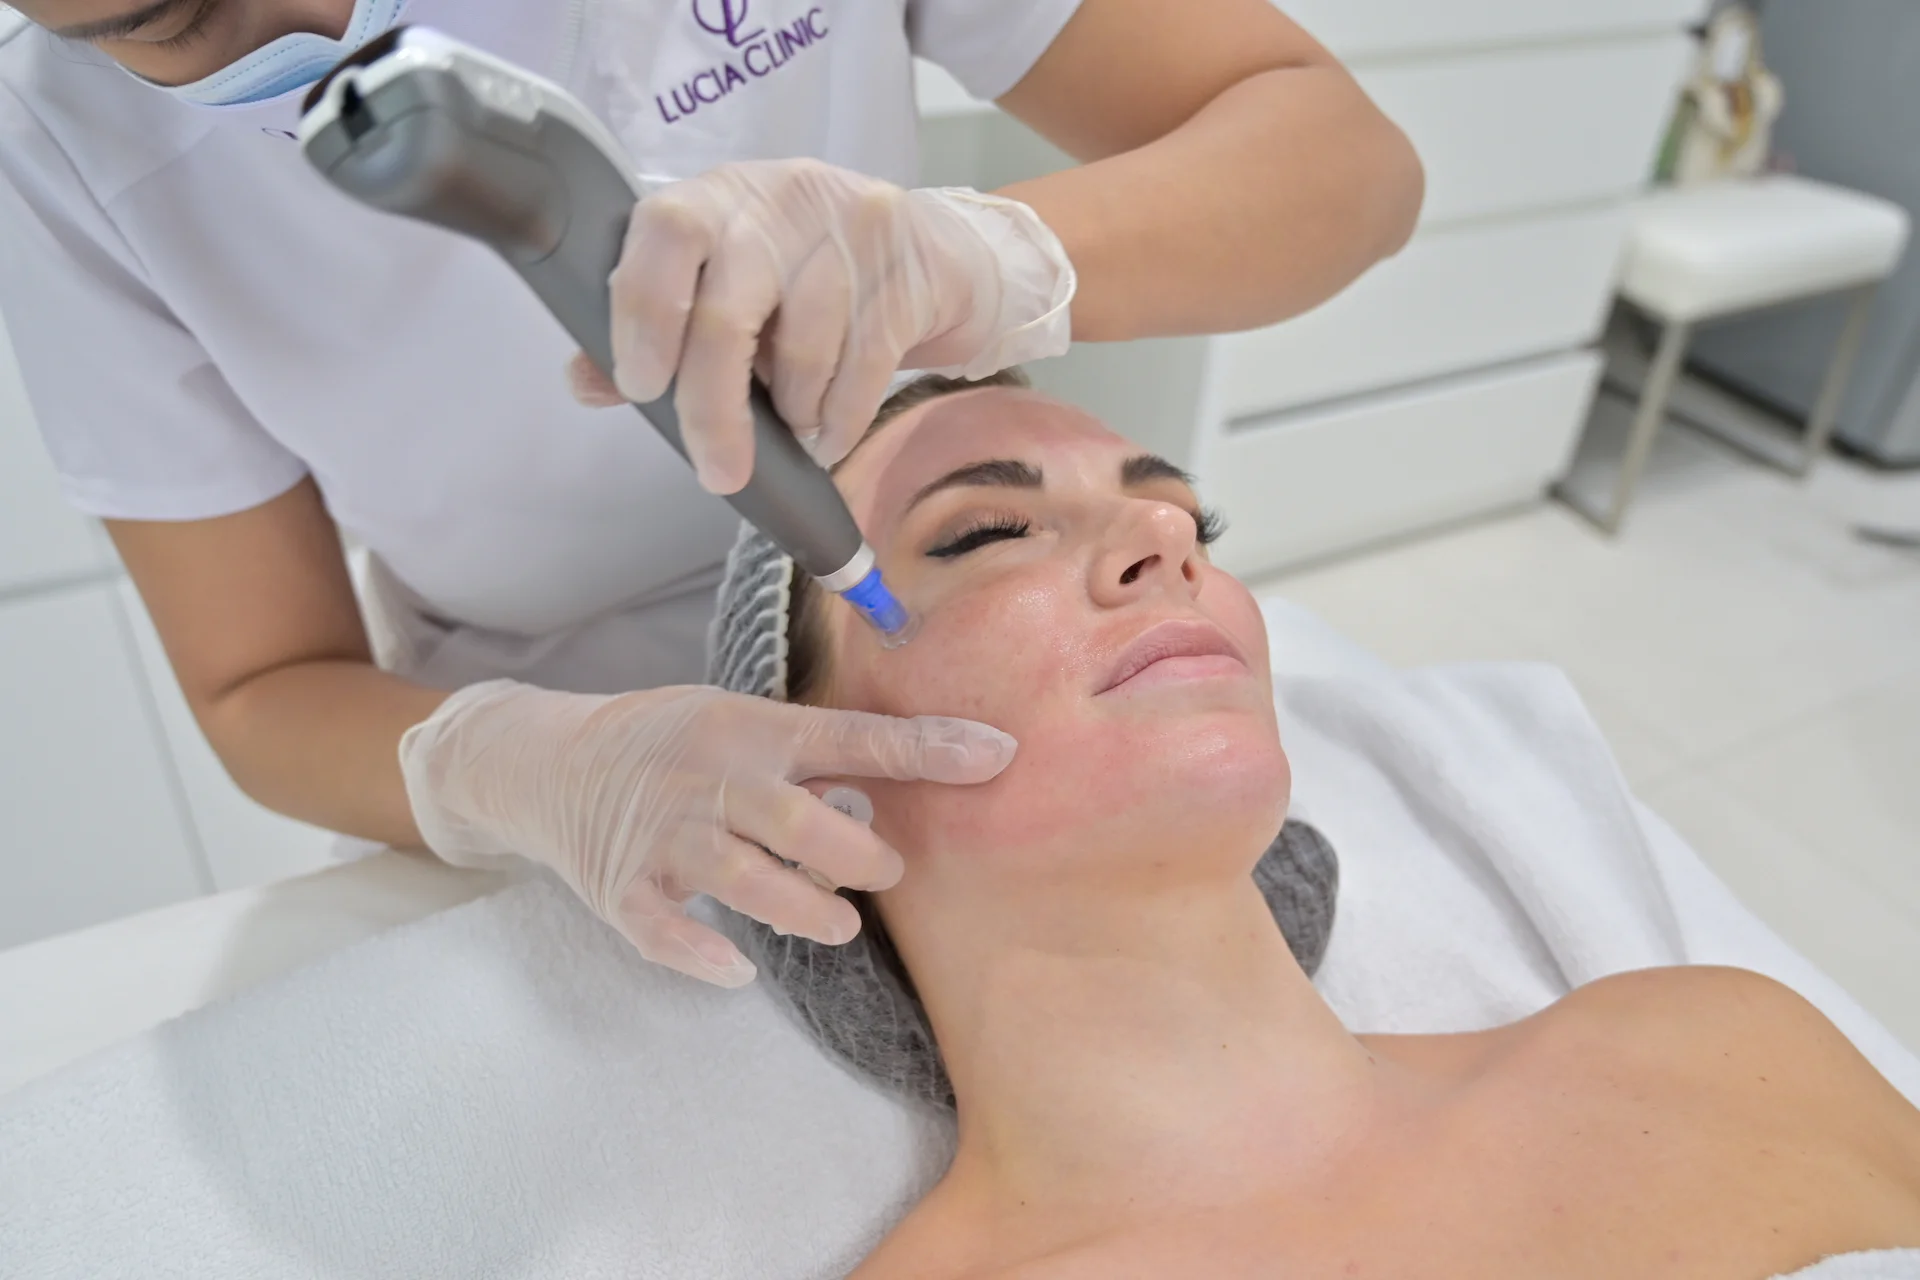 Microneedling treatment for effective collagen remodeling - improve skin appearance with advanced and safe skin firming and skin concerns reduction treatment.